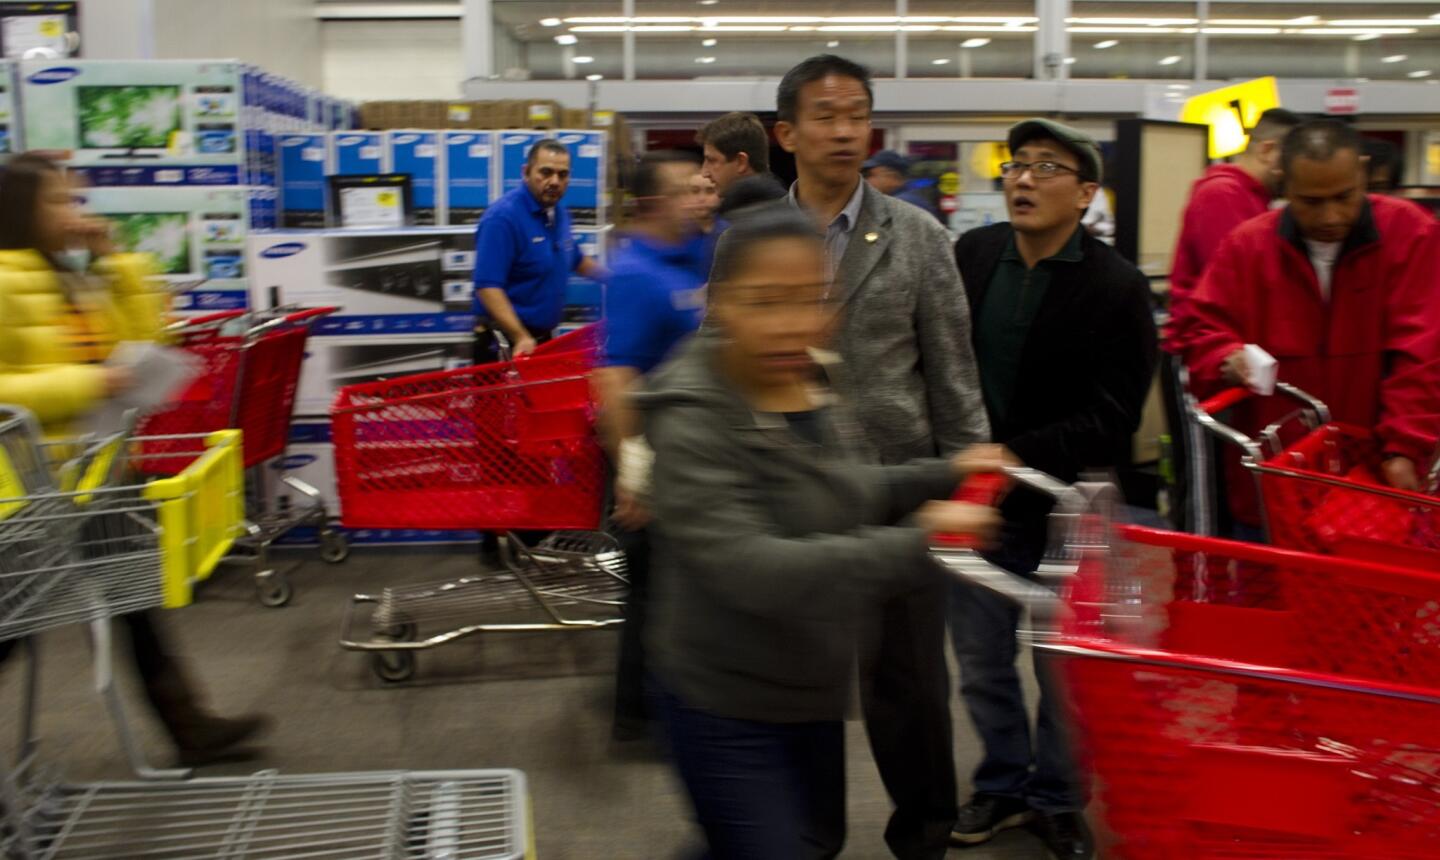 Shoppers scramble for carts